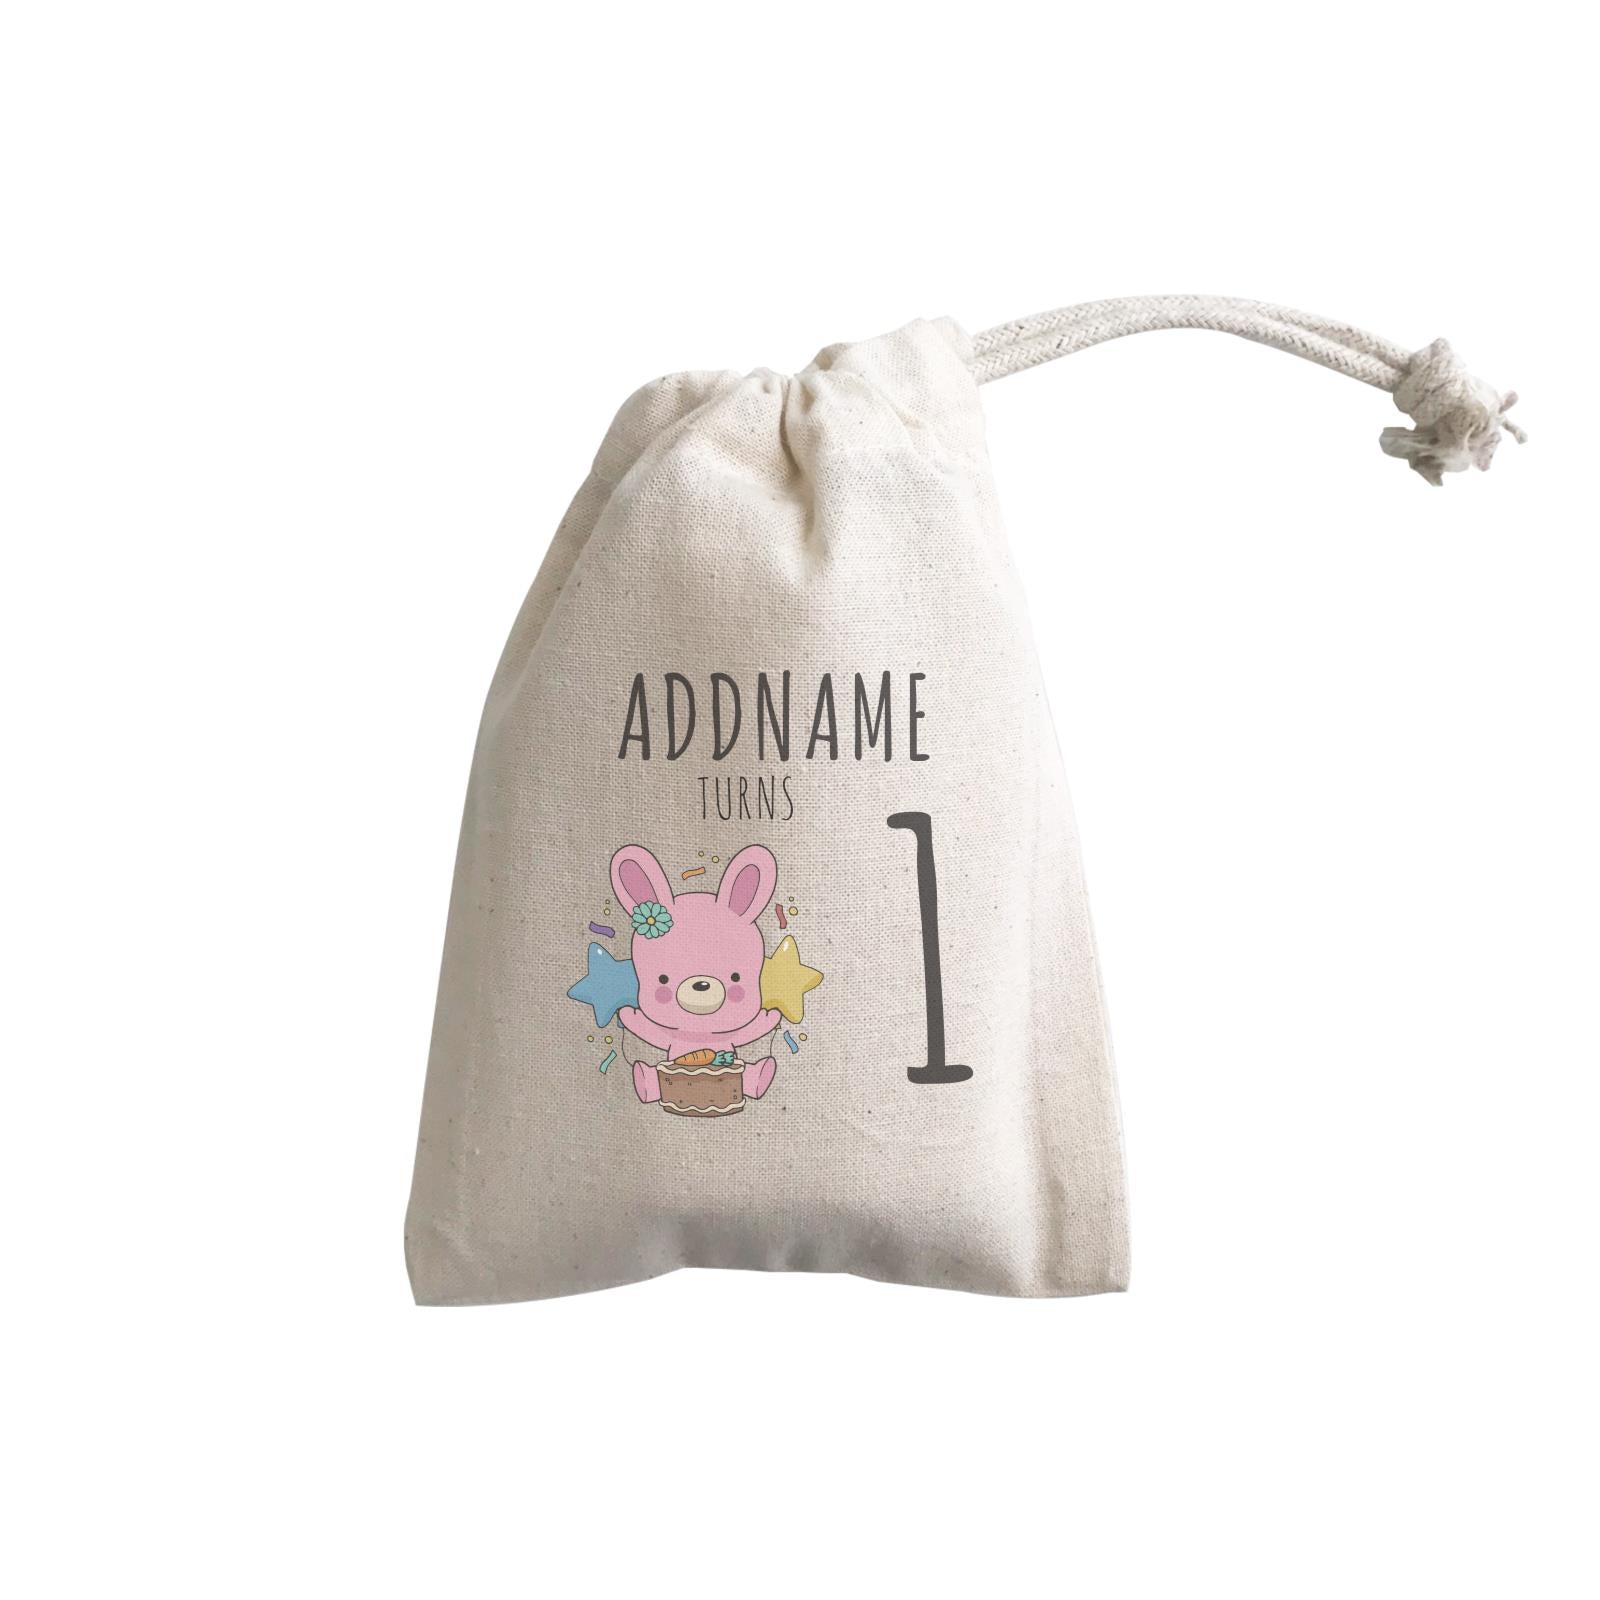 Birthday Sketch Animals Rabbit With Carrot Cake Addname Turns 1 GP Gift Pouch